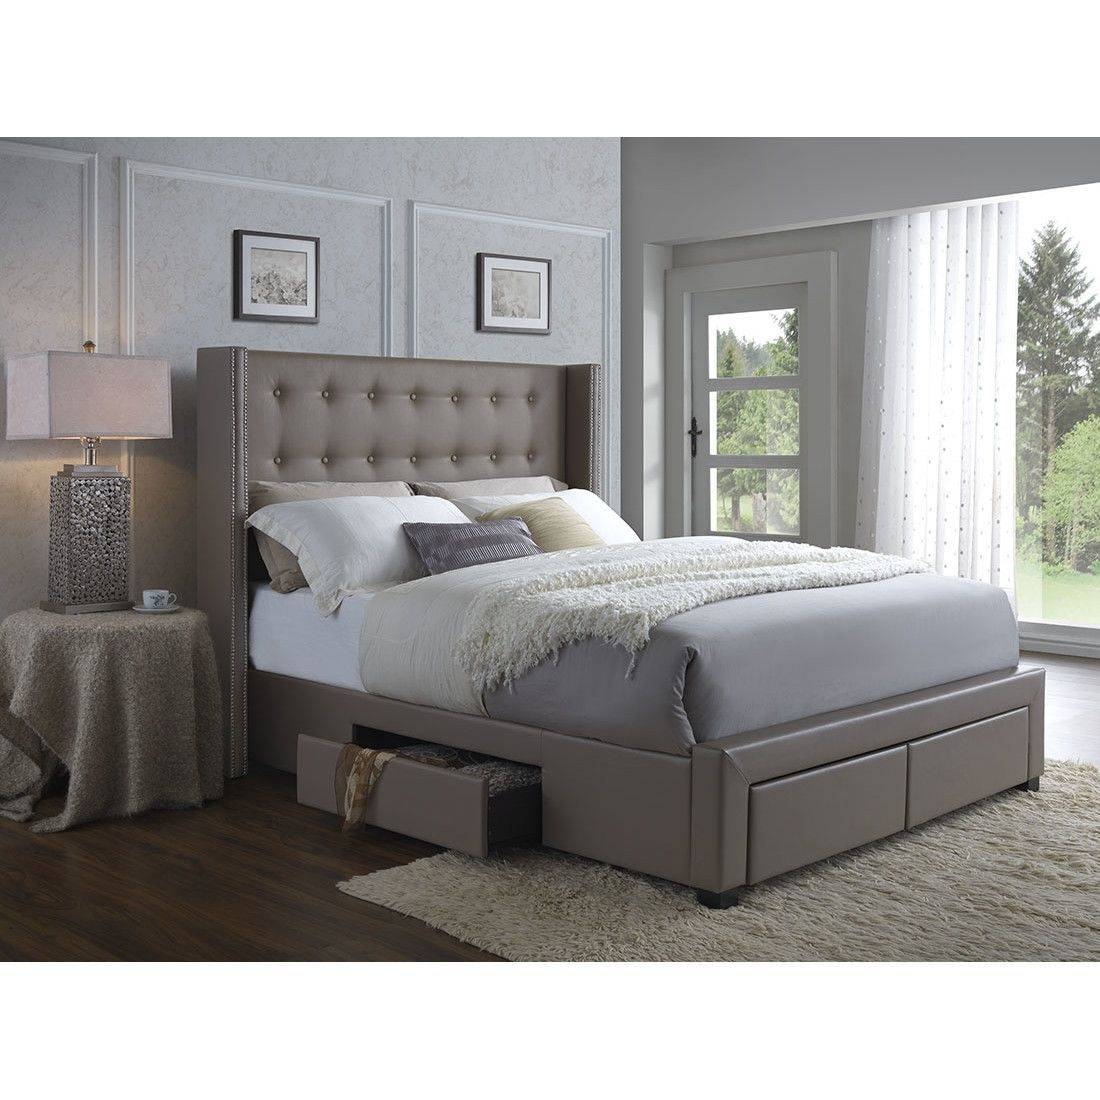 Bed With Drawers Underneath Visualhunt, Queen Bed Frames With Drawers Underneath